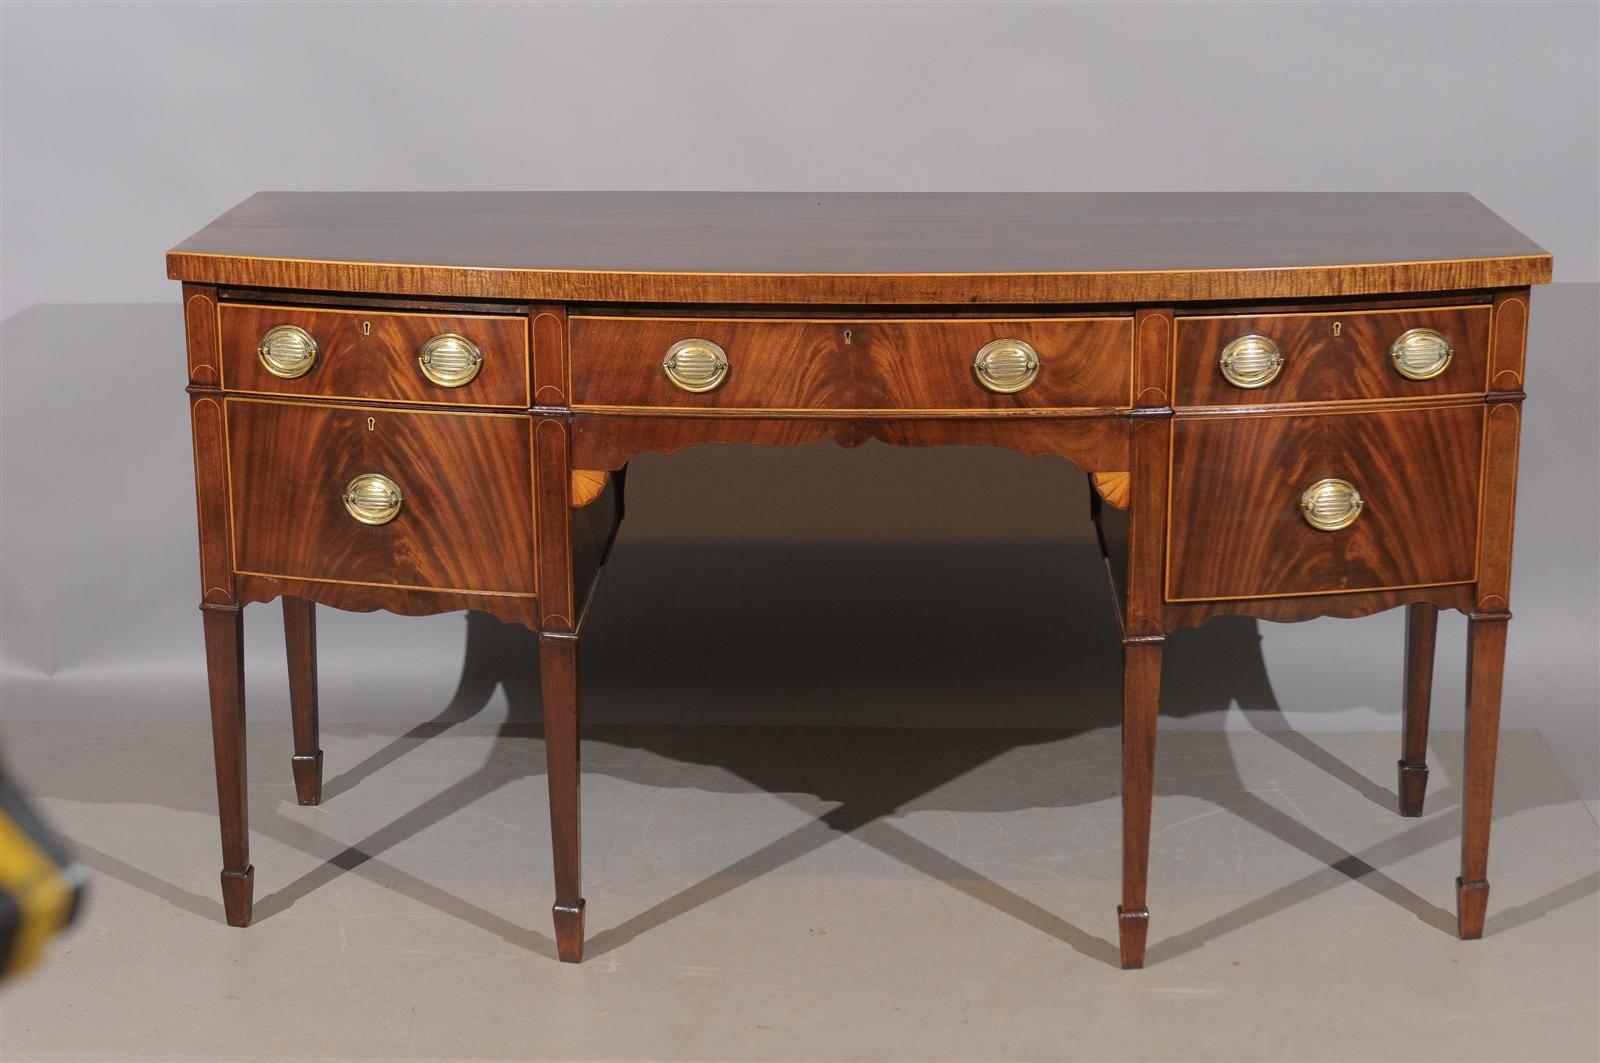 19th century English bowfront sideboard in mahogany with crossbanding, inlay and cellarette drawer.